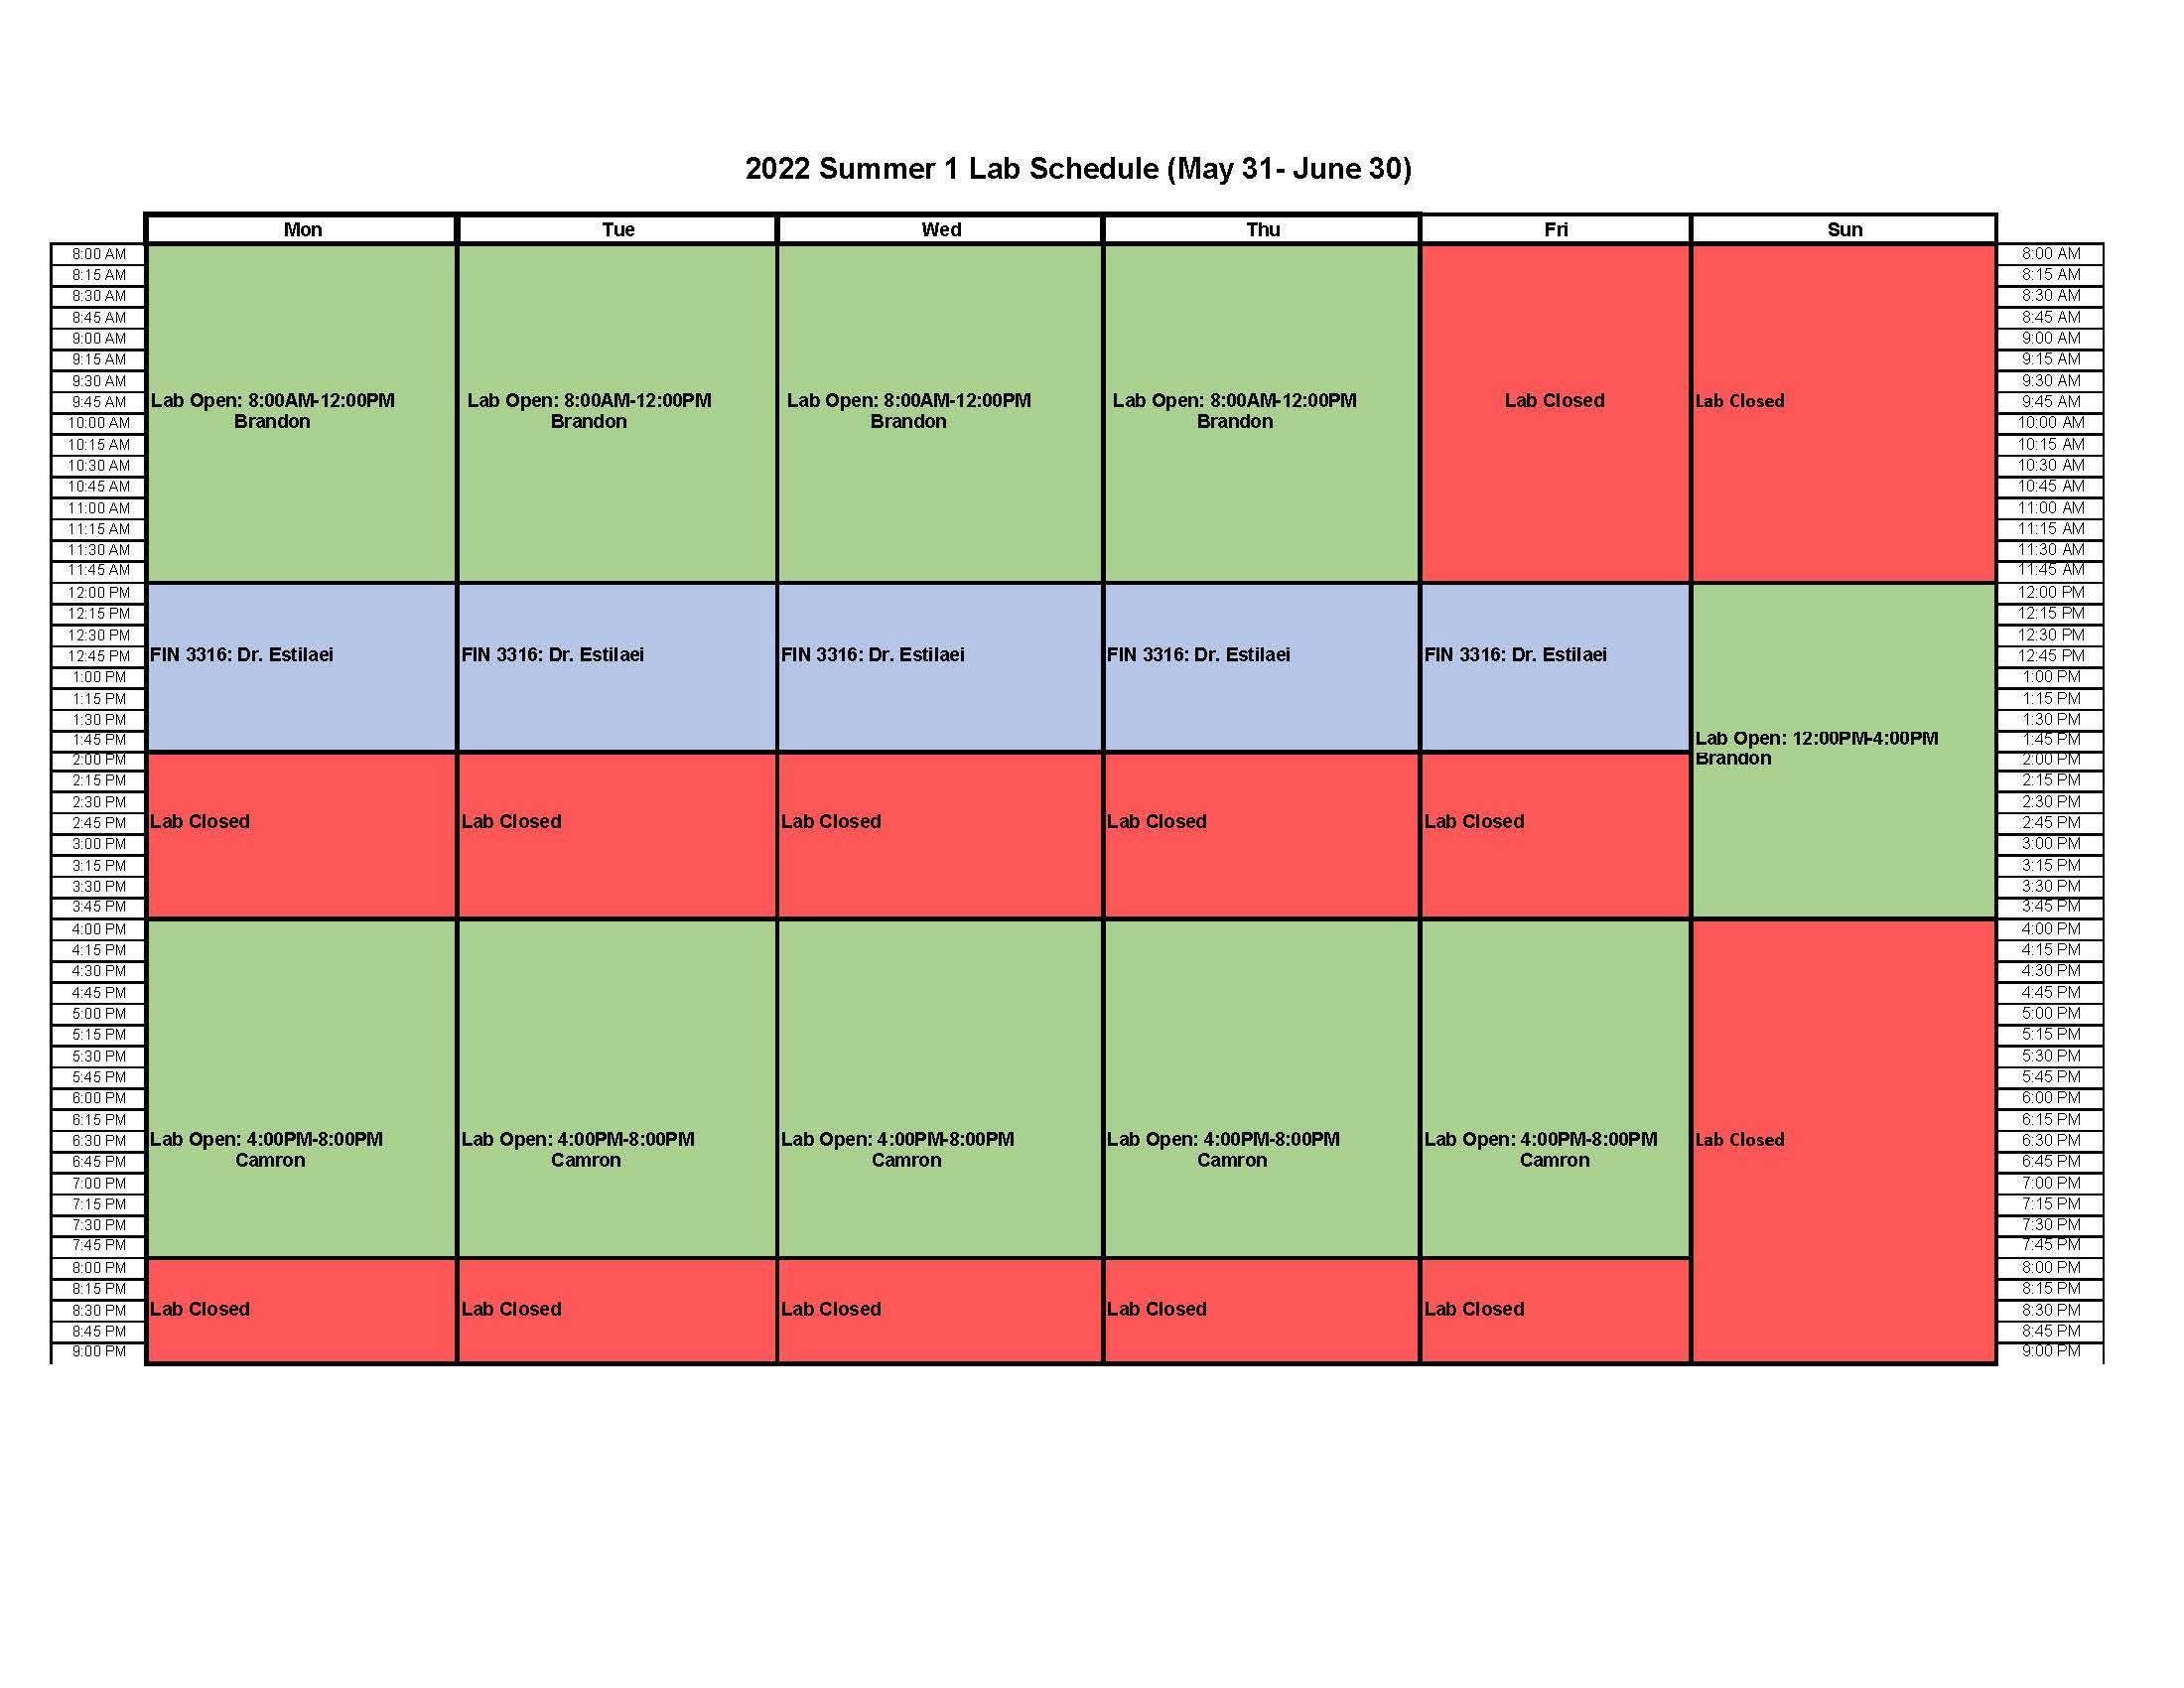 Lab schedule, for text-version click image